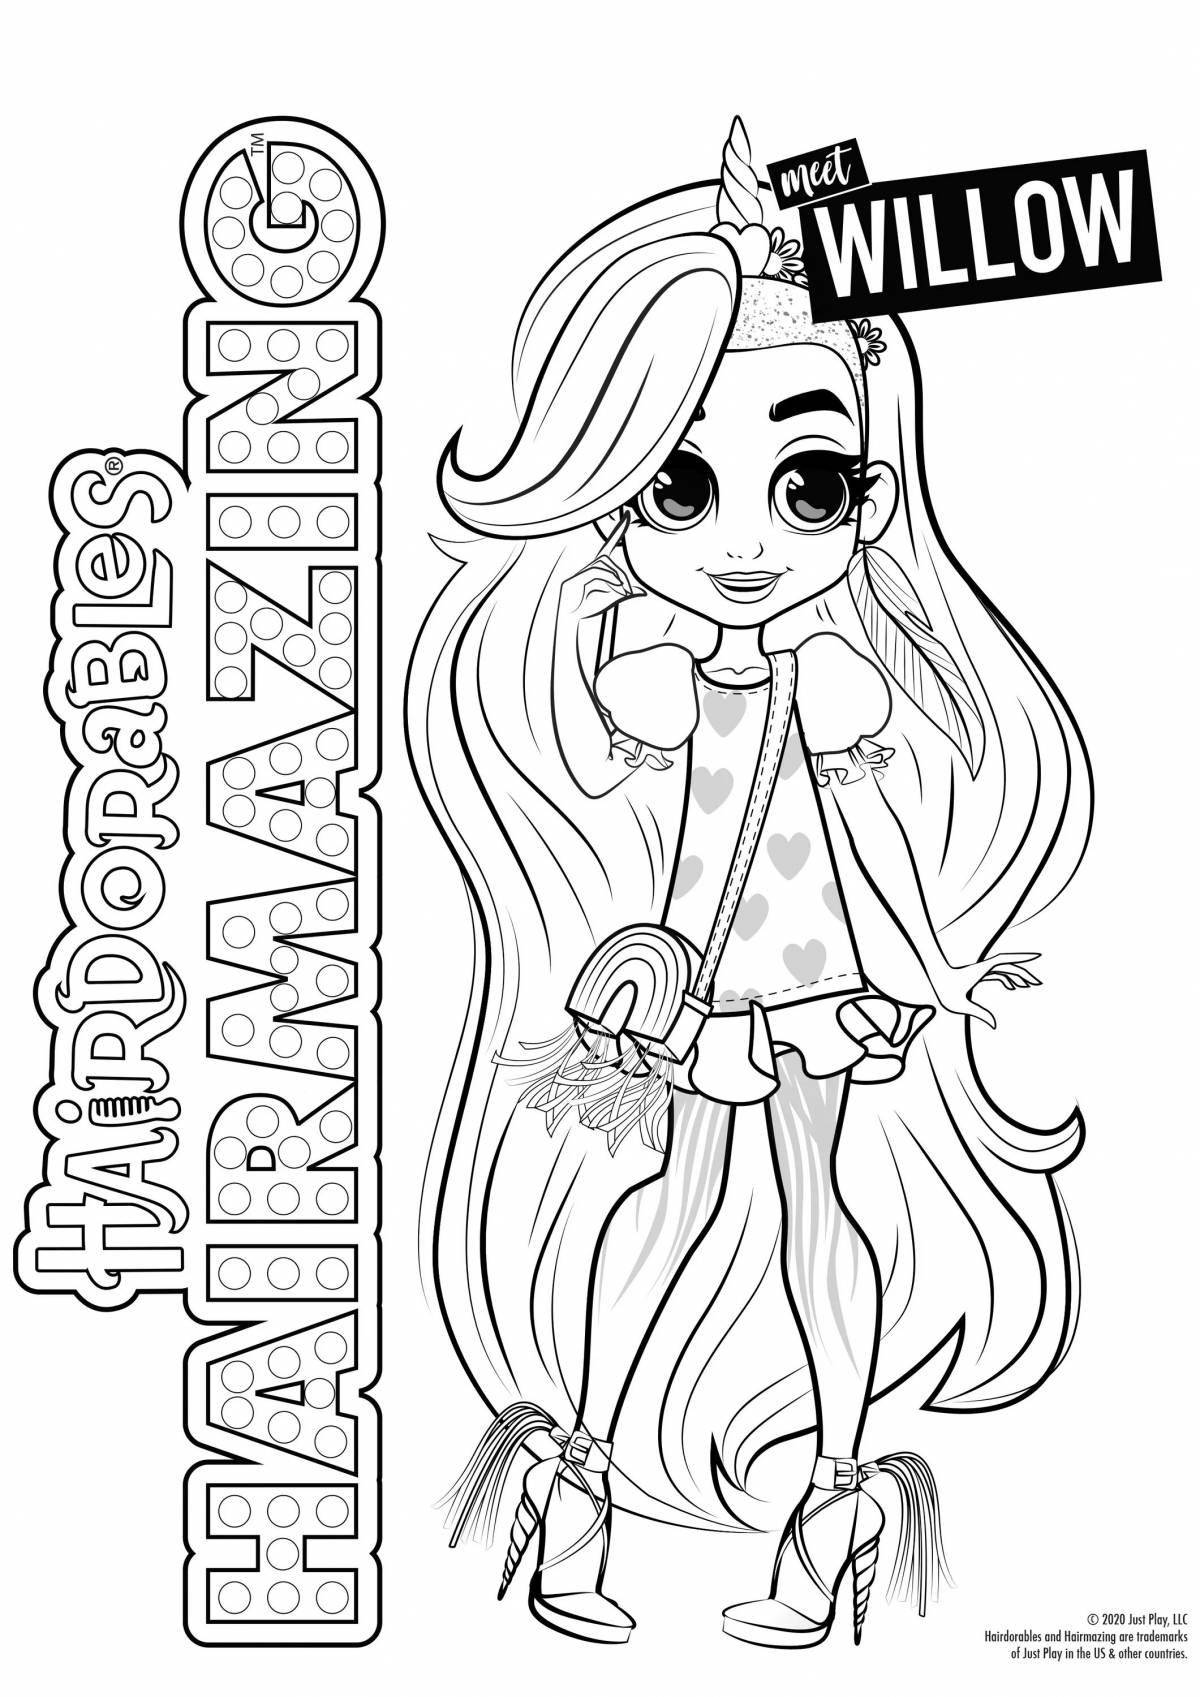 Awesome cave club dolls coloring pages